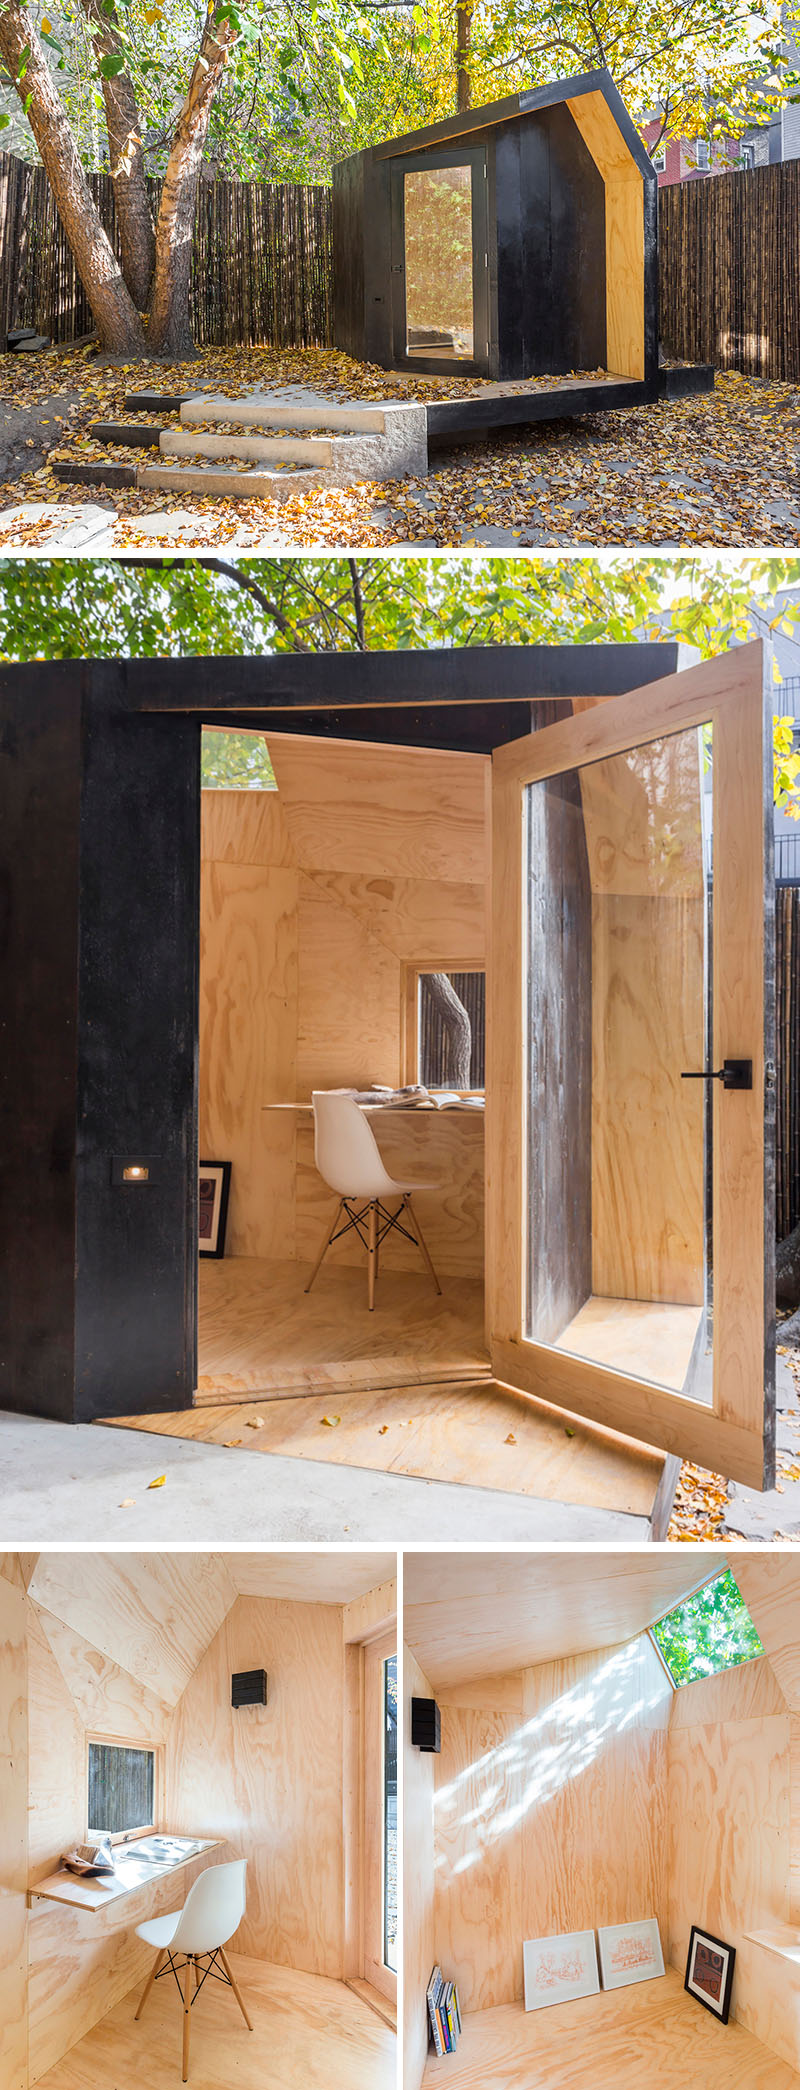 14 Bright Ideas for Backyard Offices, Studios and Guest Houses